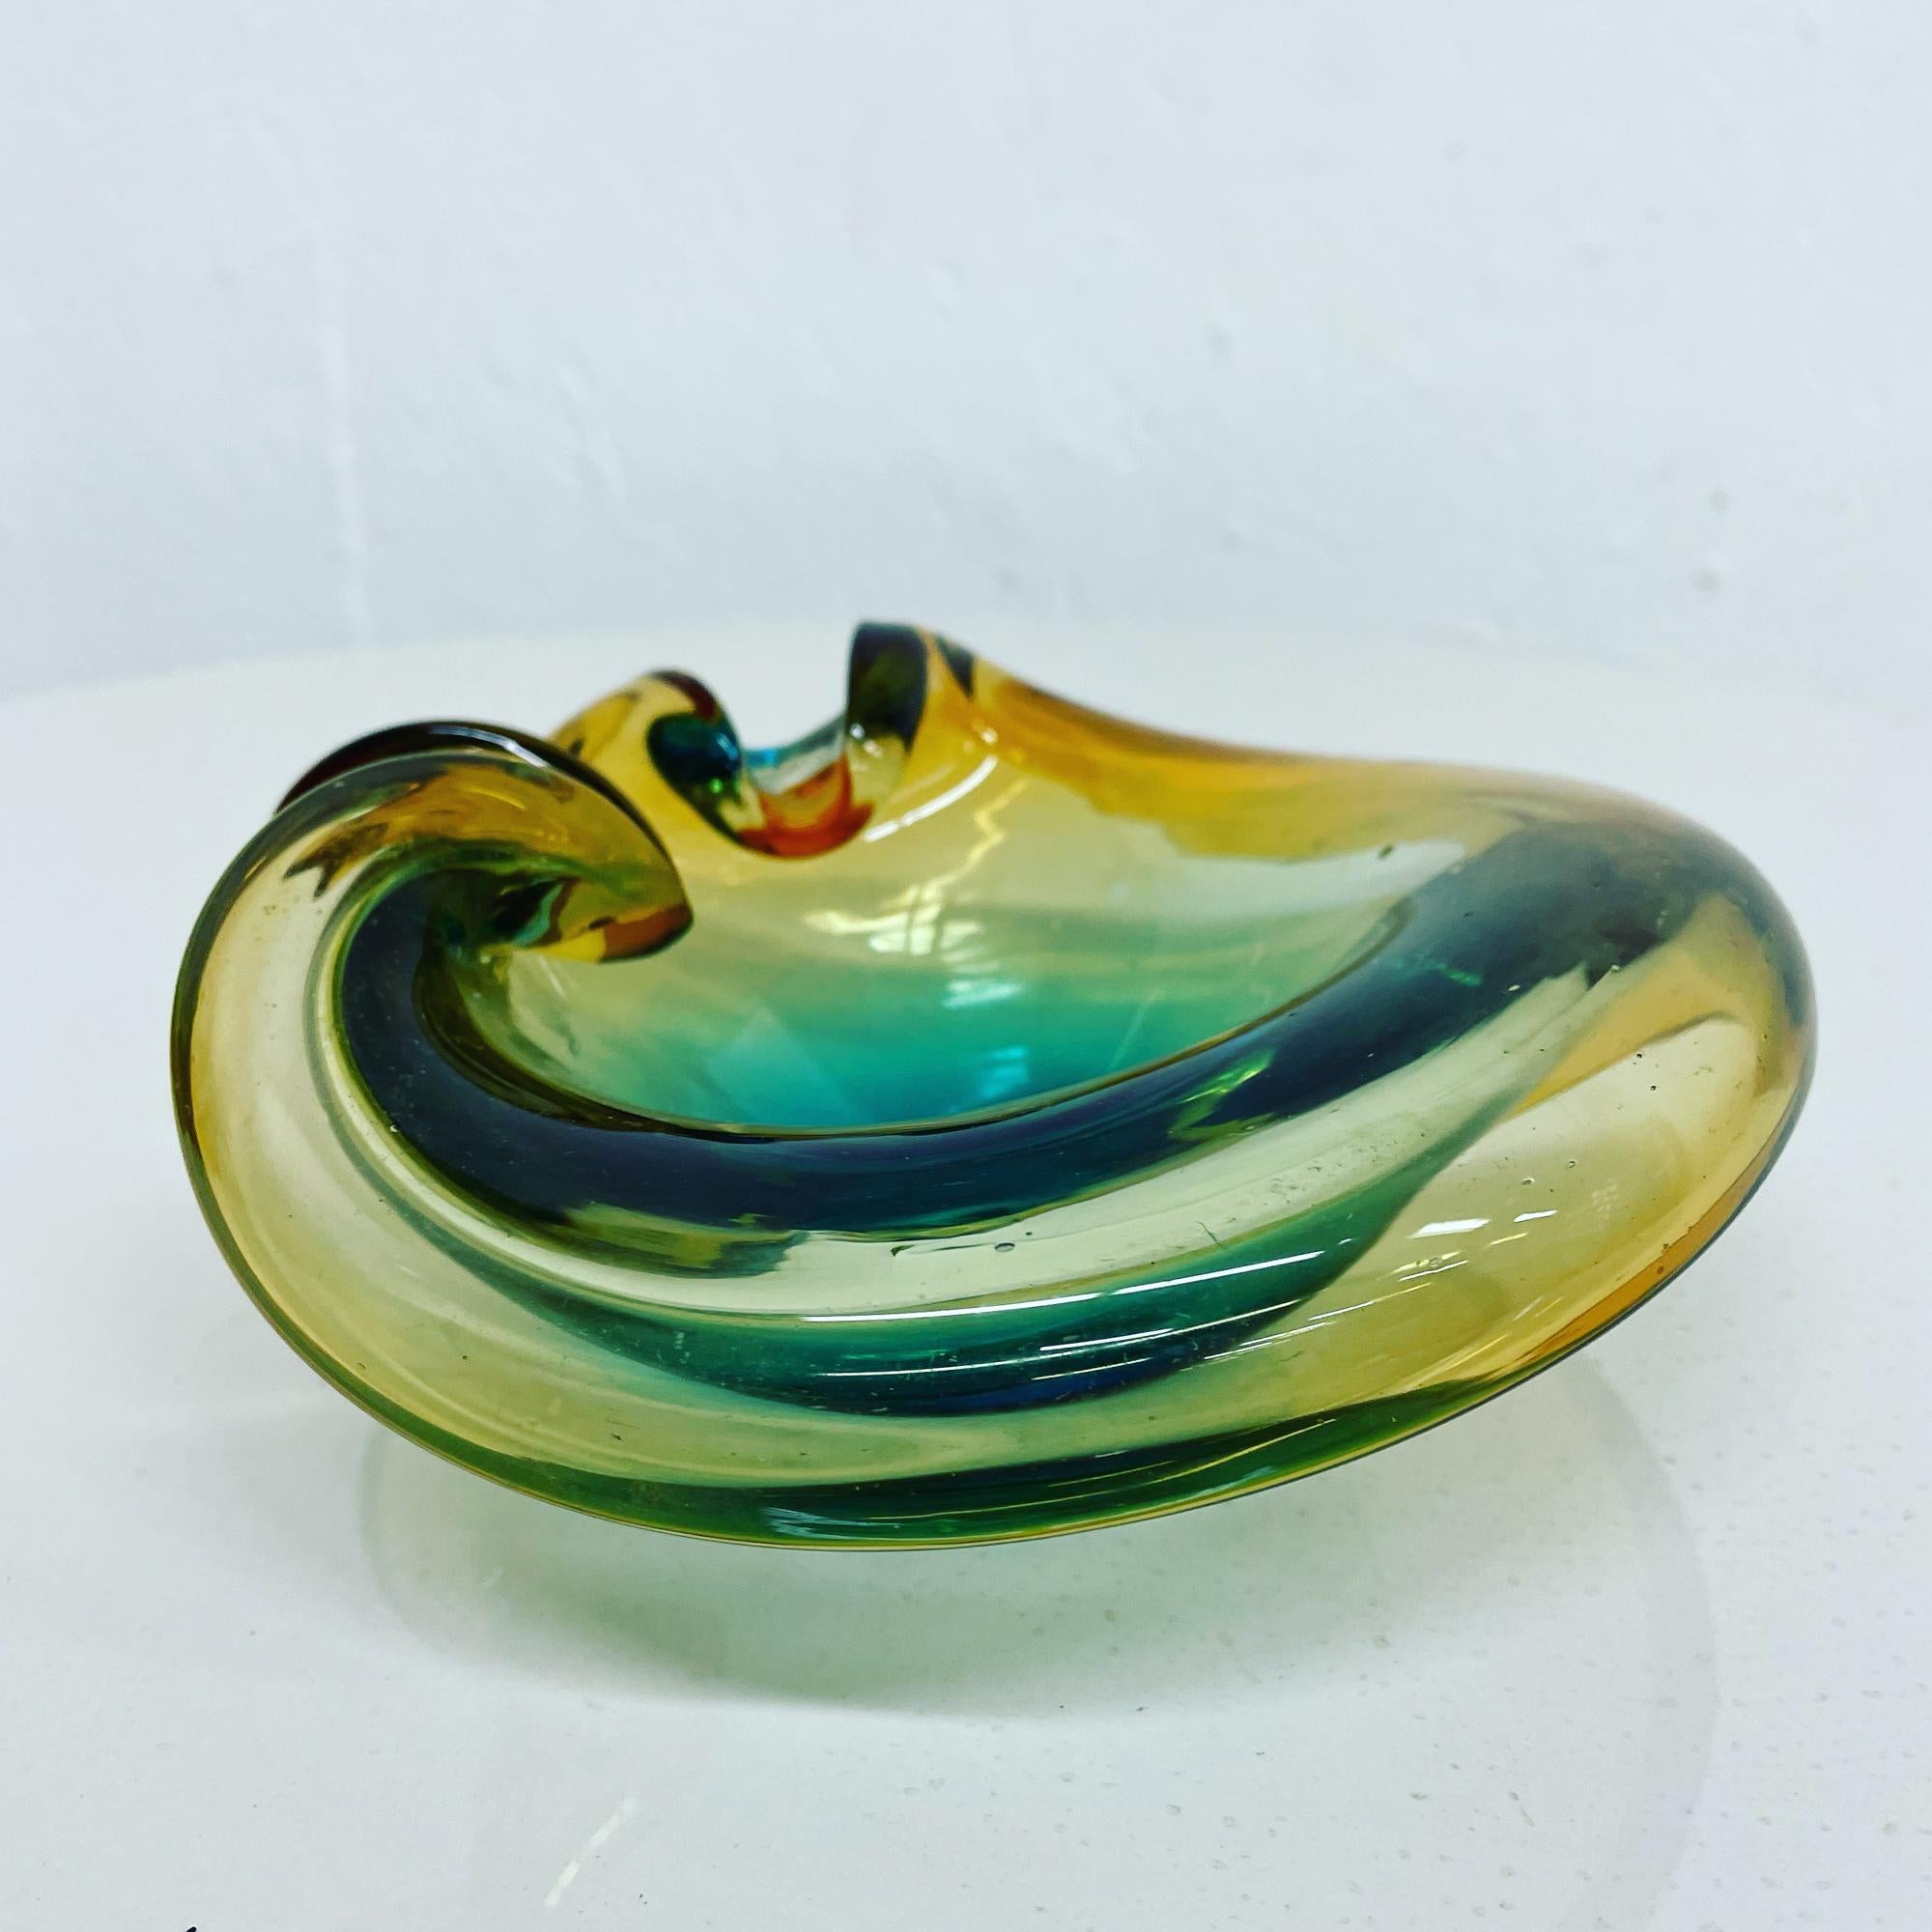 Late 20th Century Swirling Color Curled Murano Sommerso Art Glass Ashtray Bowl Seguso Italy 1970s